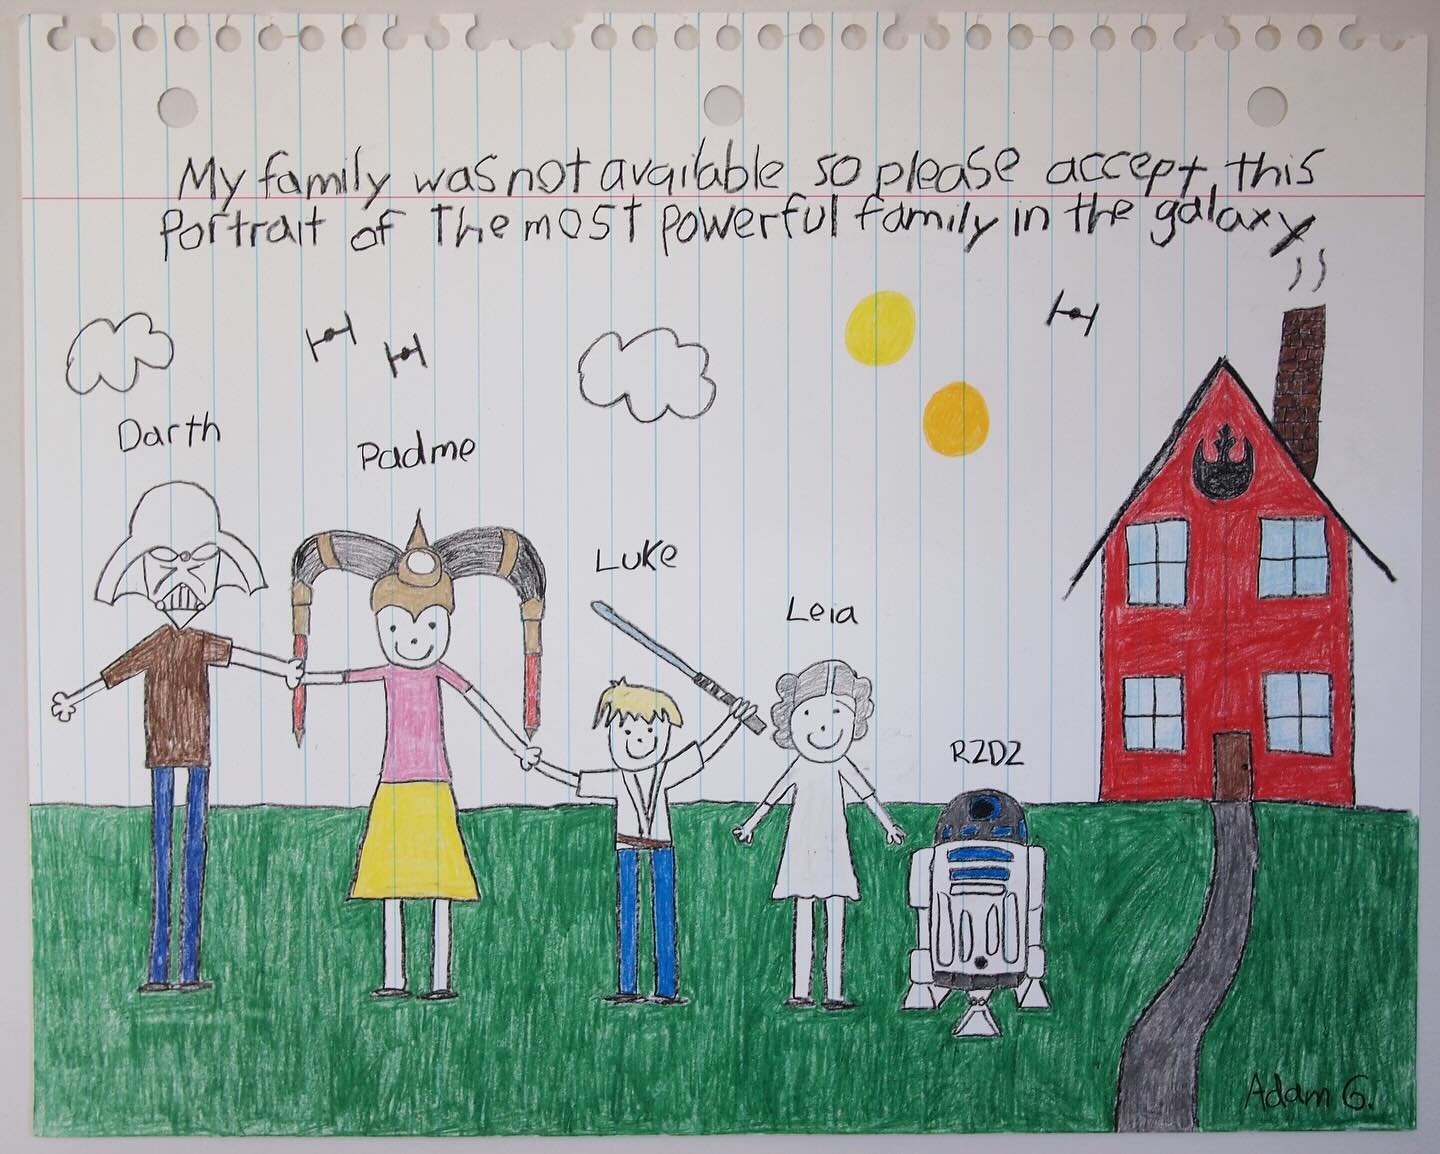 &ldquo;Star Wars Family&rdquo;, 40x32 inches. May the 4th be with you. #maytheforcebewithyou #maythefourthbewithyou #starwars  #middleschool #detention #popart #art #artinspiration #artlife #artistic #artoftheday #artgallery #artistsofinstagram #crea